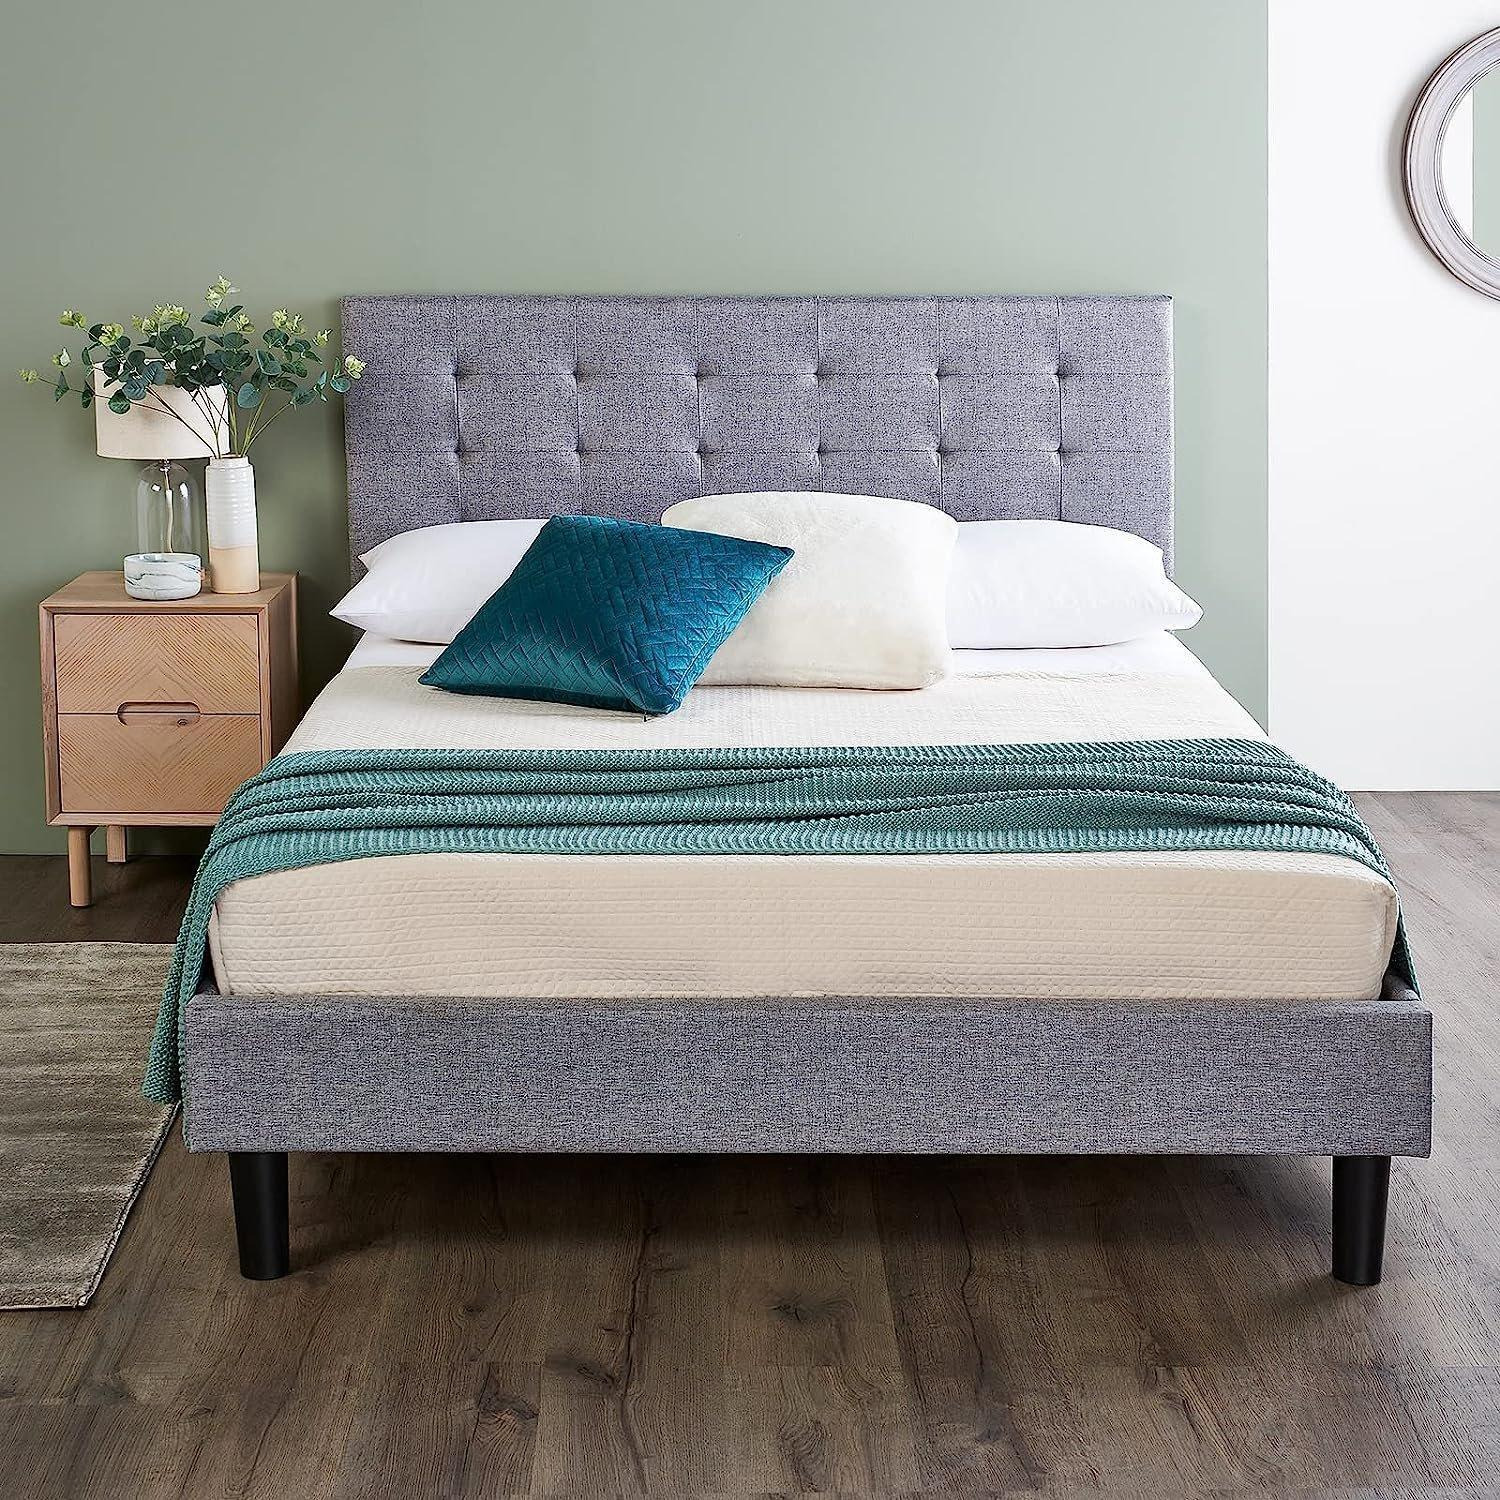 Grey Upholstered Bed Frame With Padded Headboard (No Mattress) - image 1